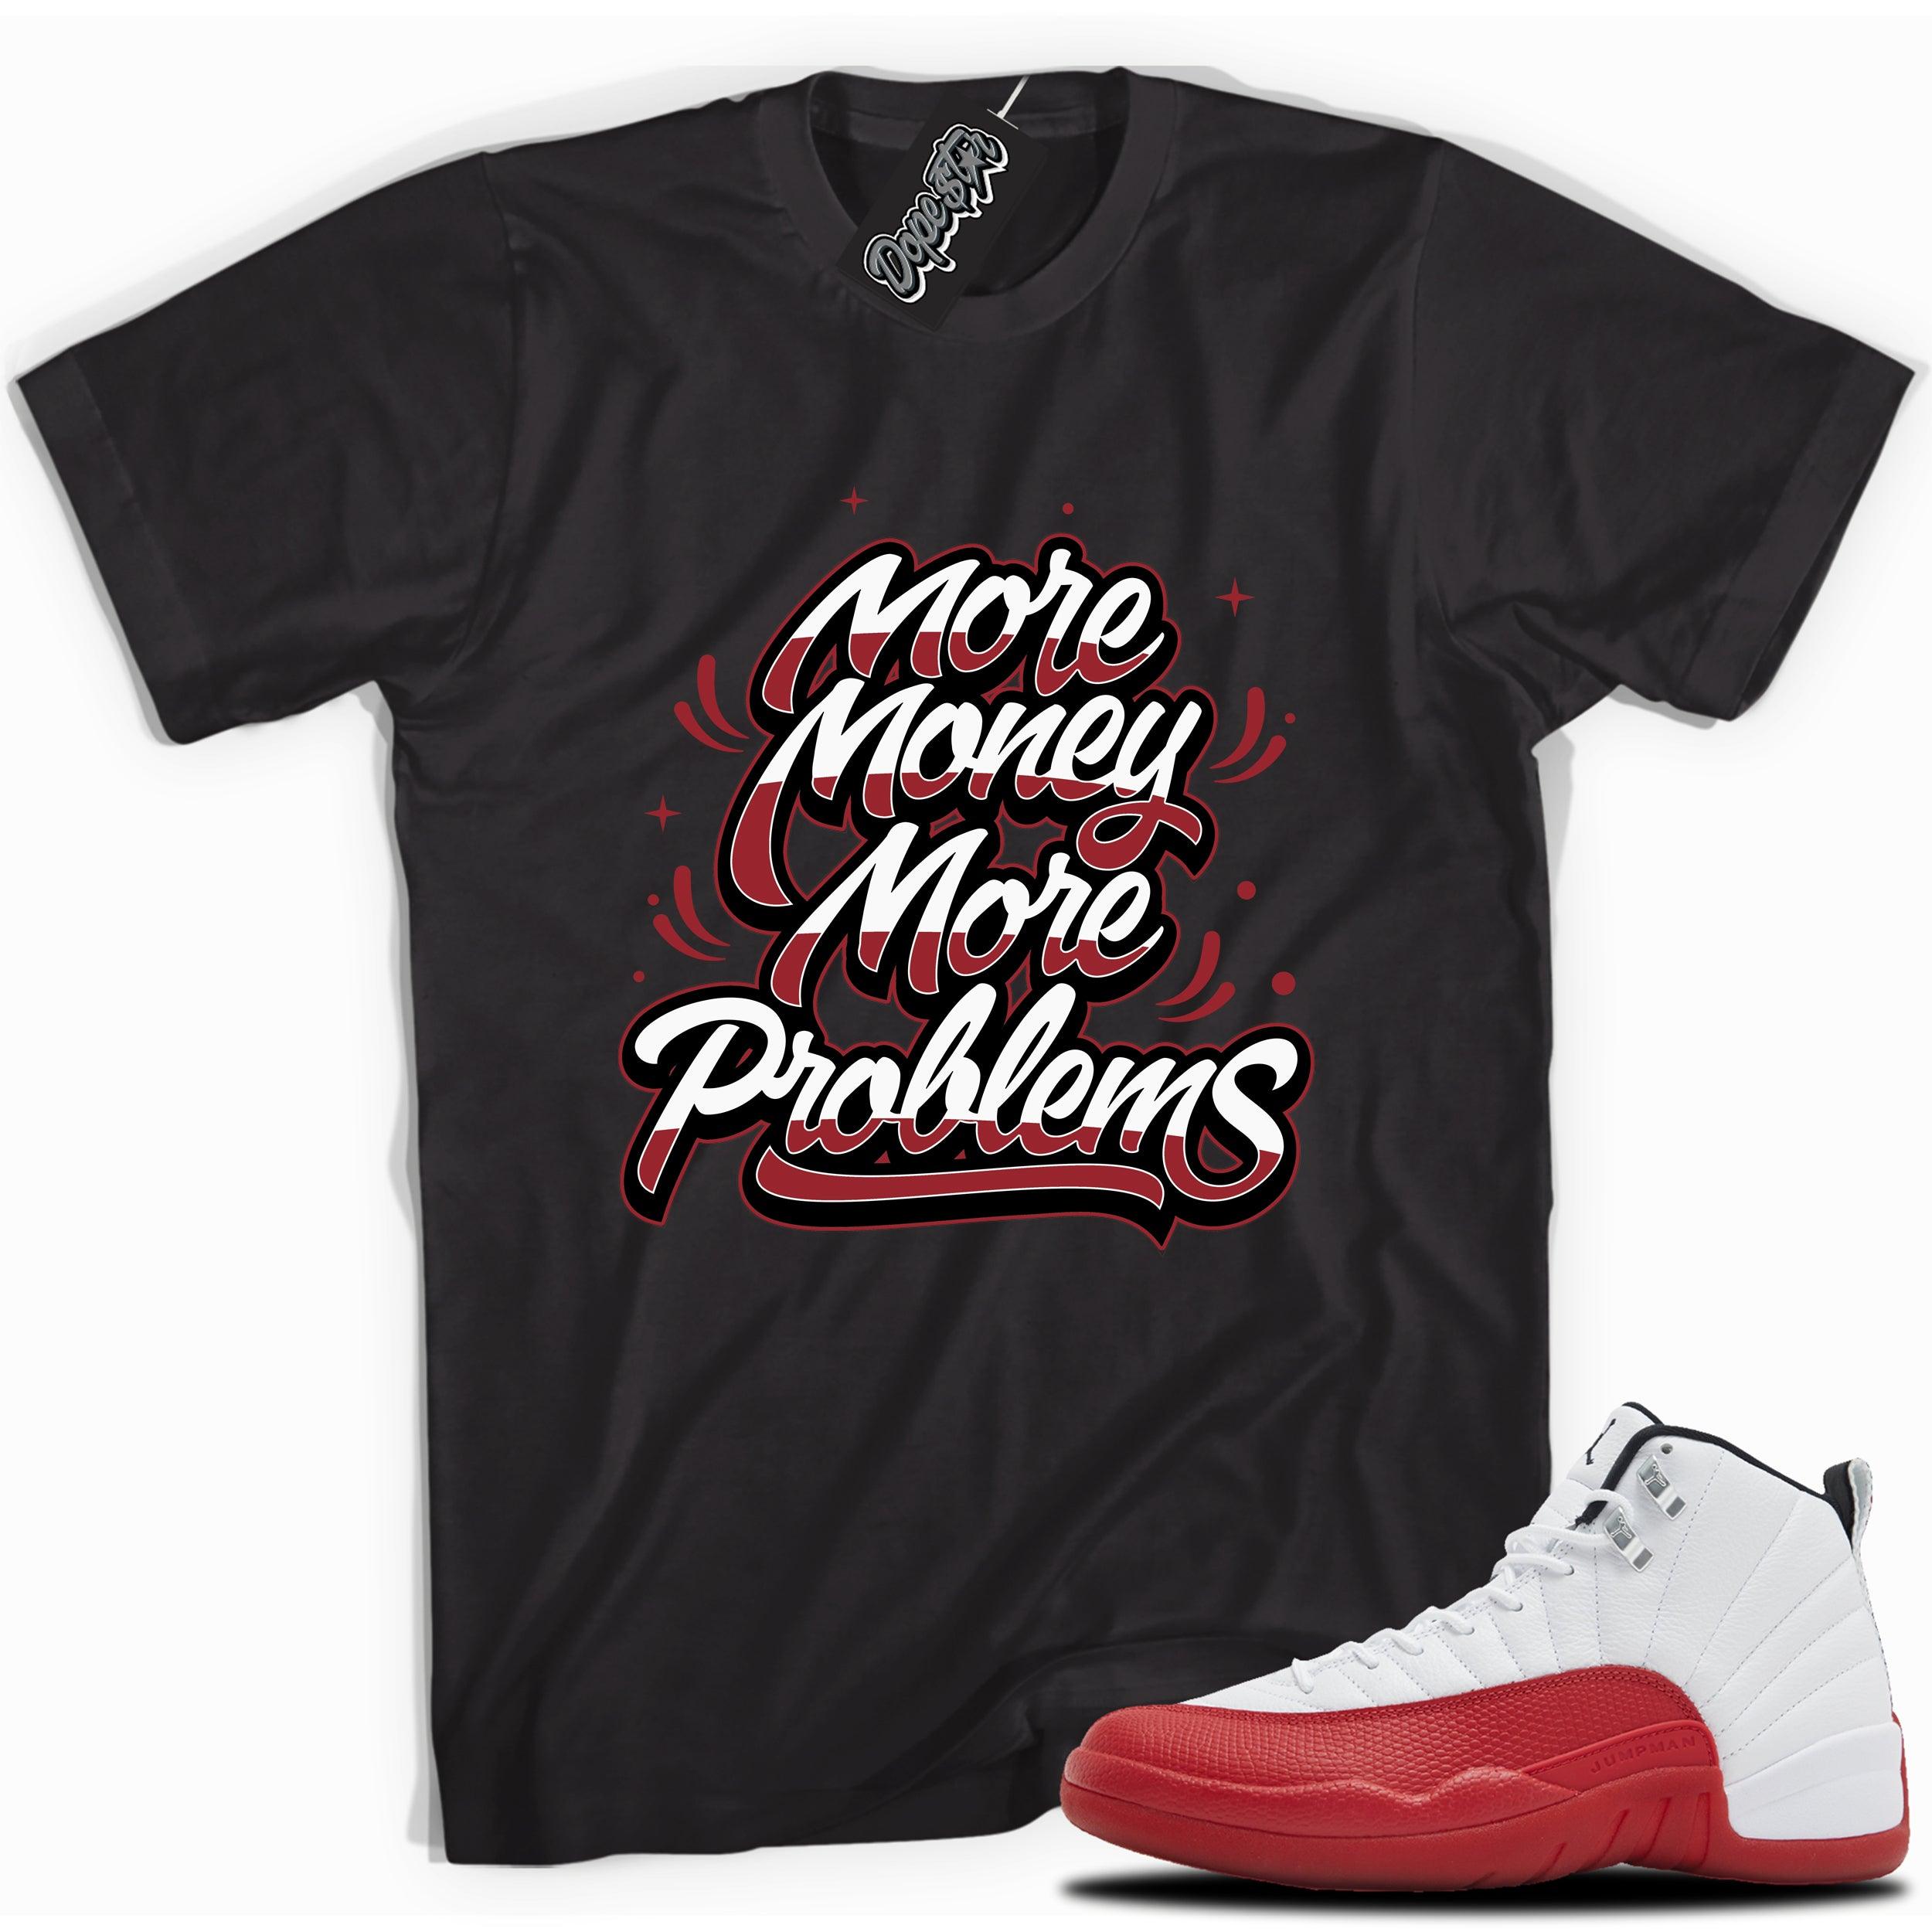 Cool Black graphic tee with “MORE MONEY MORE PROBLEMS” print, that perfectly matches Air Jordan 12 Retro Cherry Red 2023 red and white sneakers 